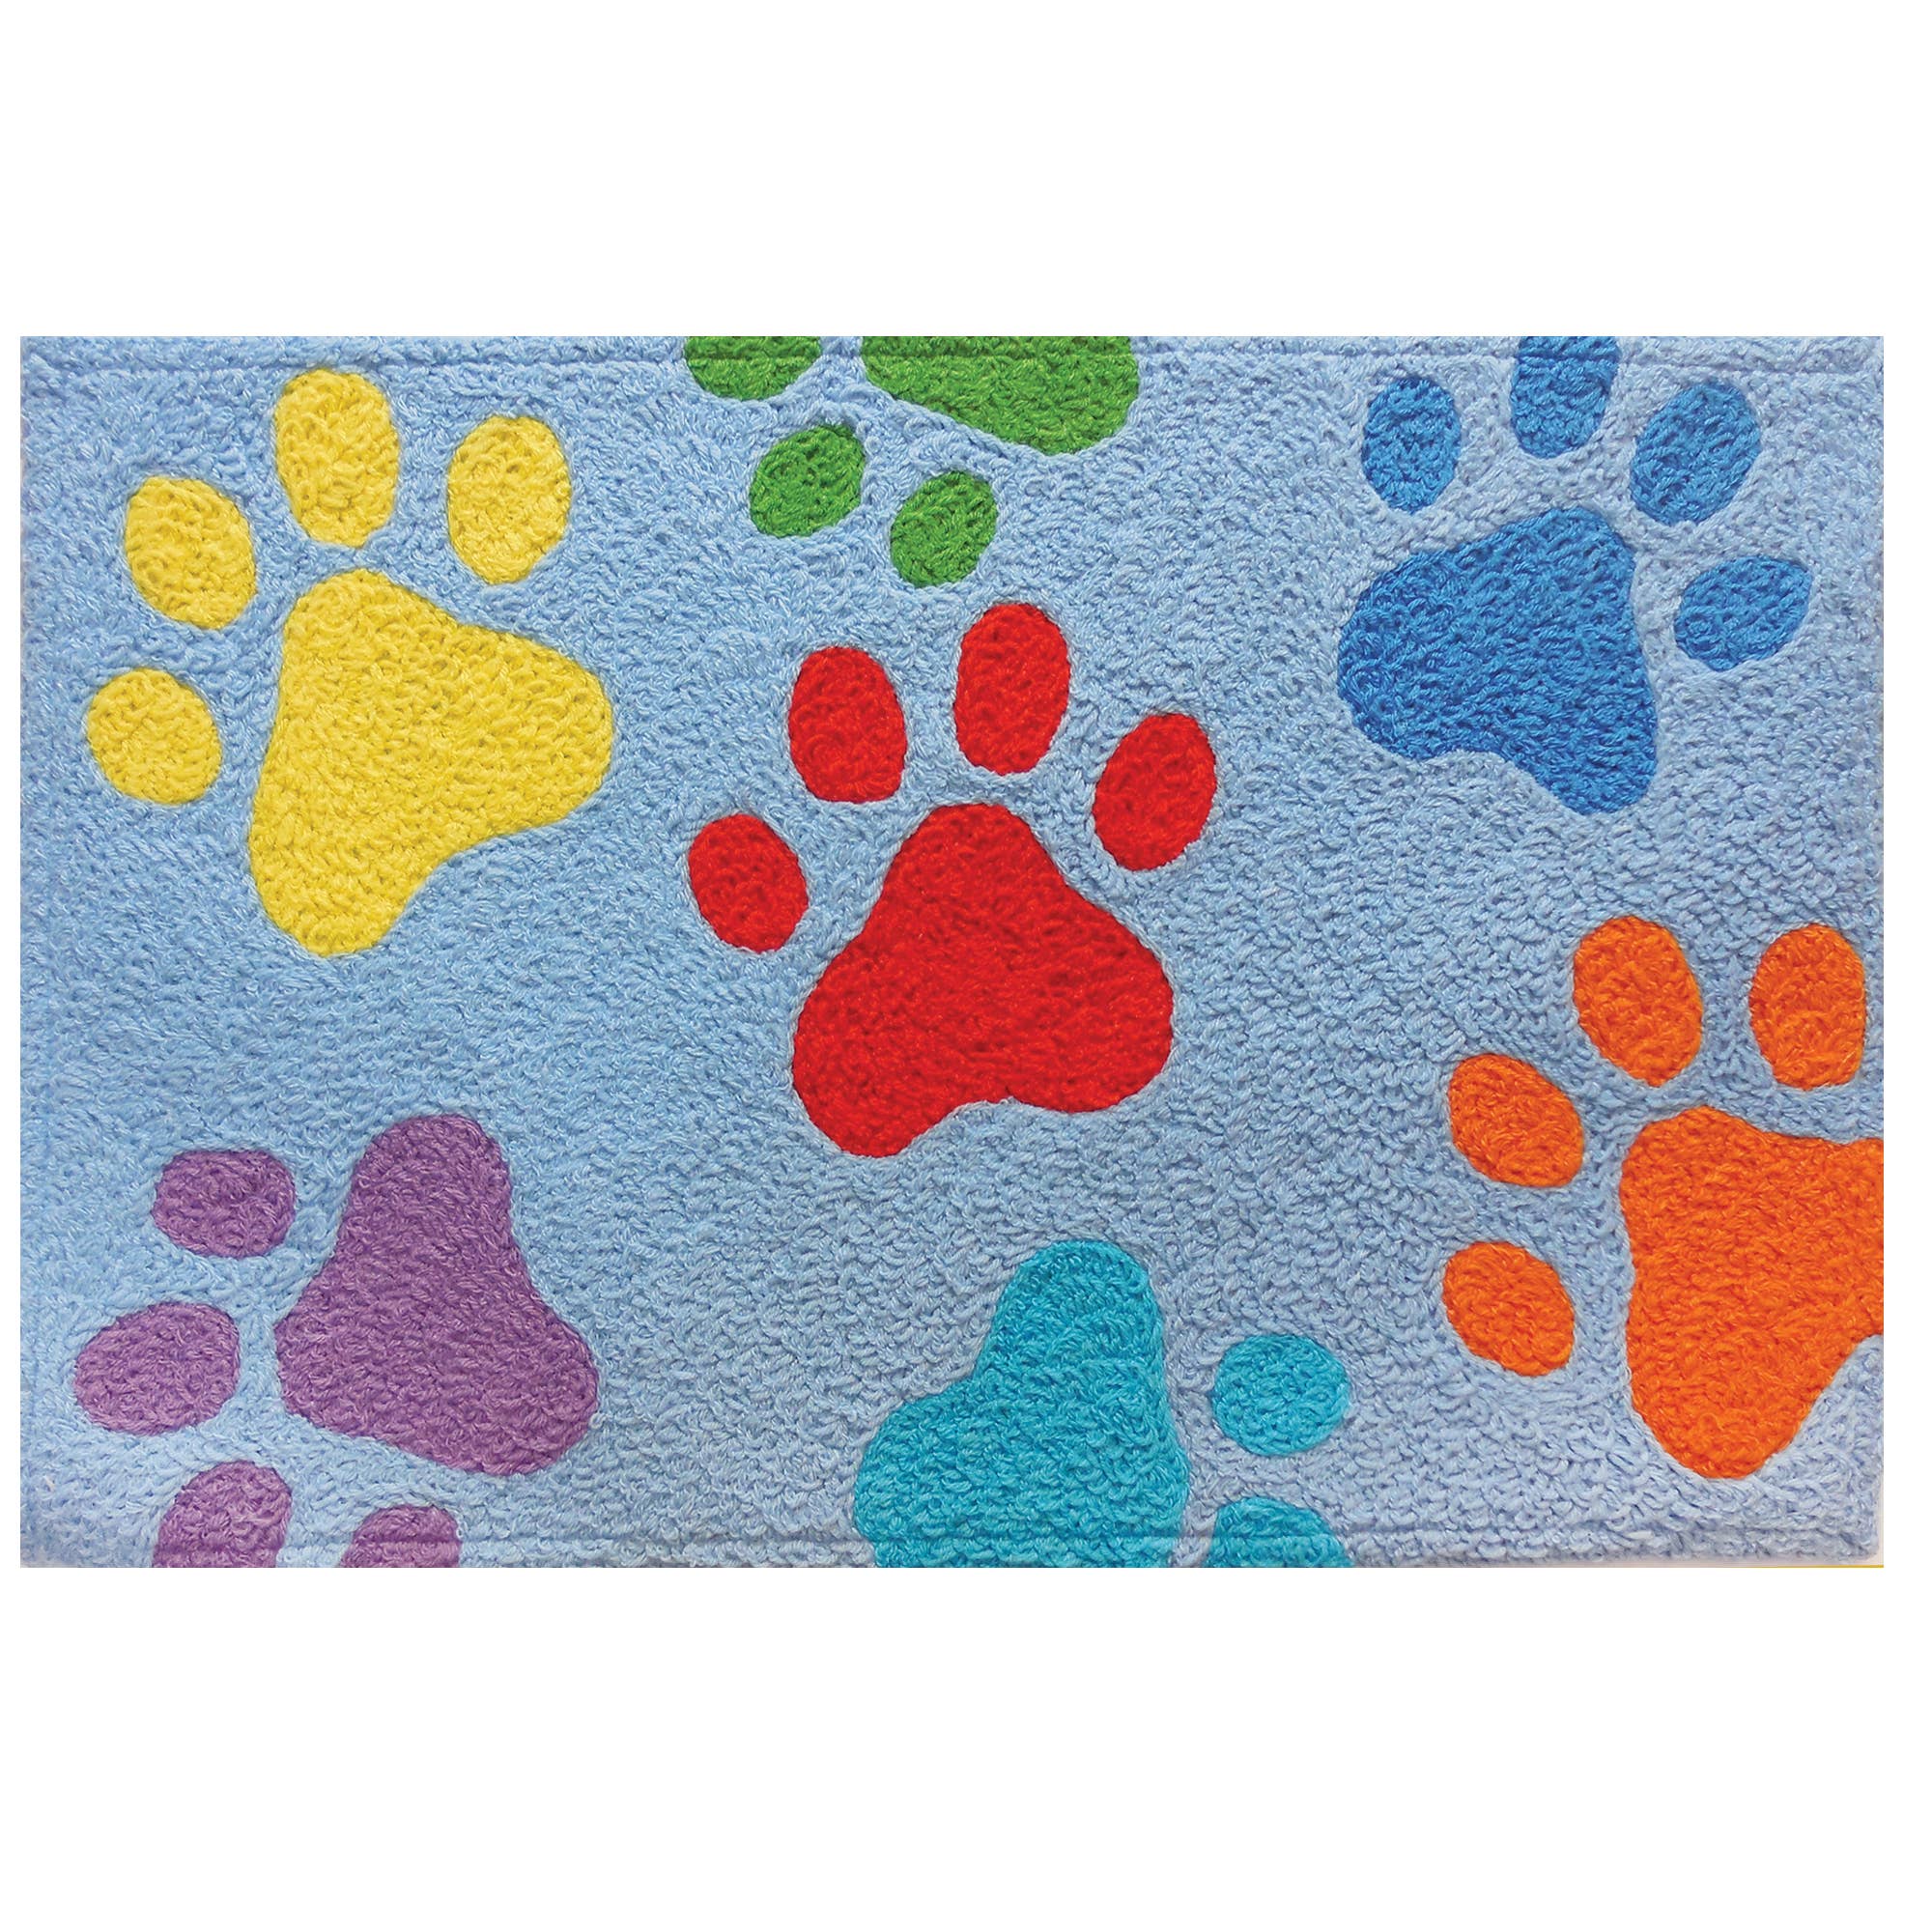 20” x 30” Colorful Paws Rug